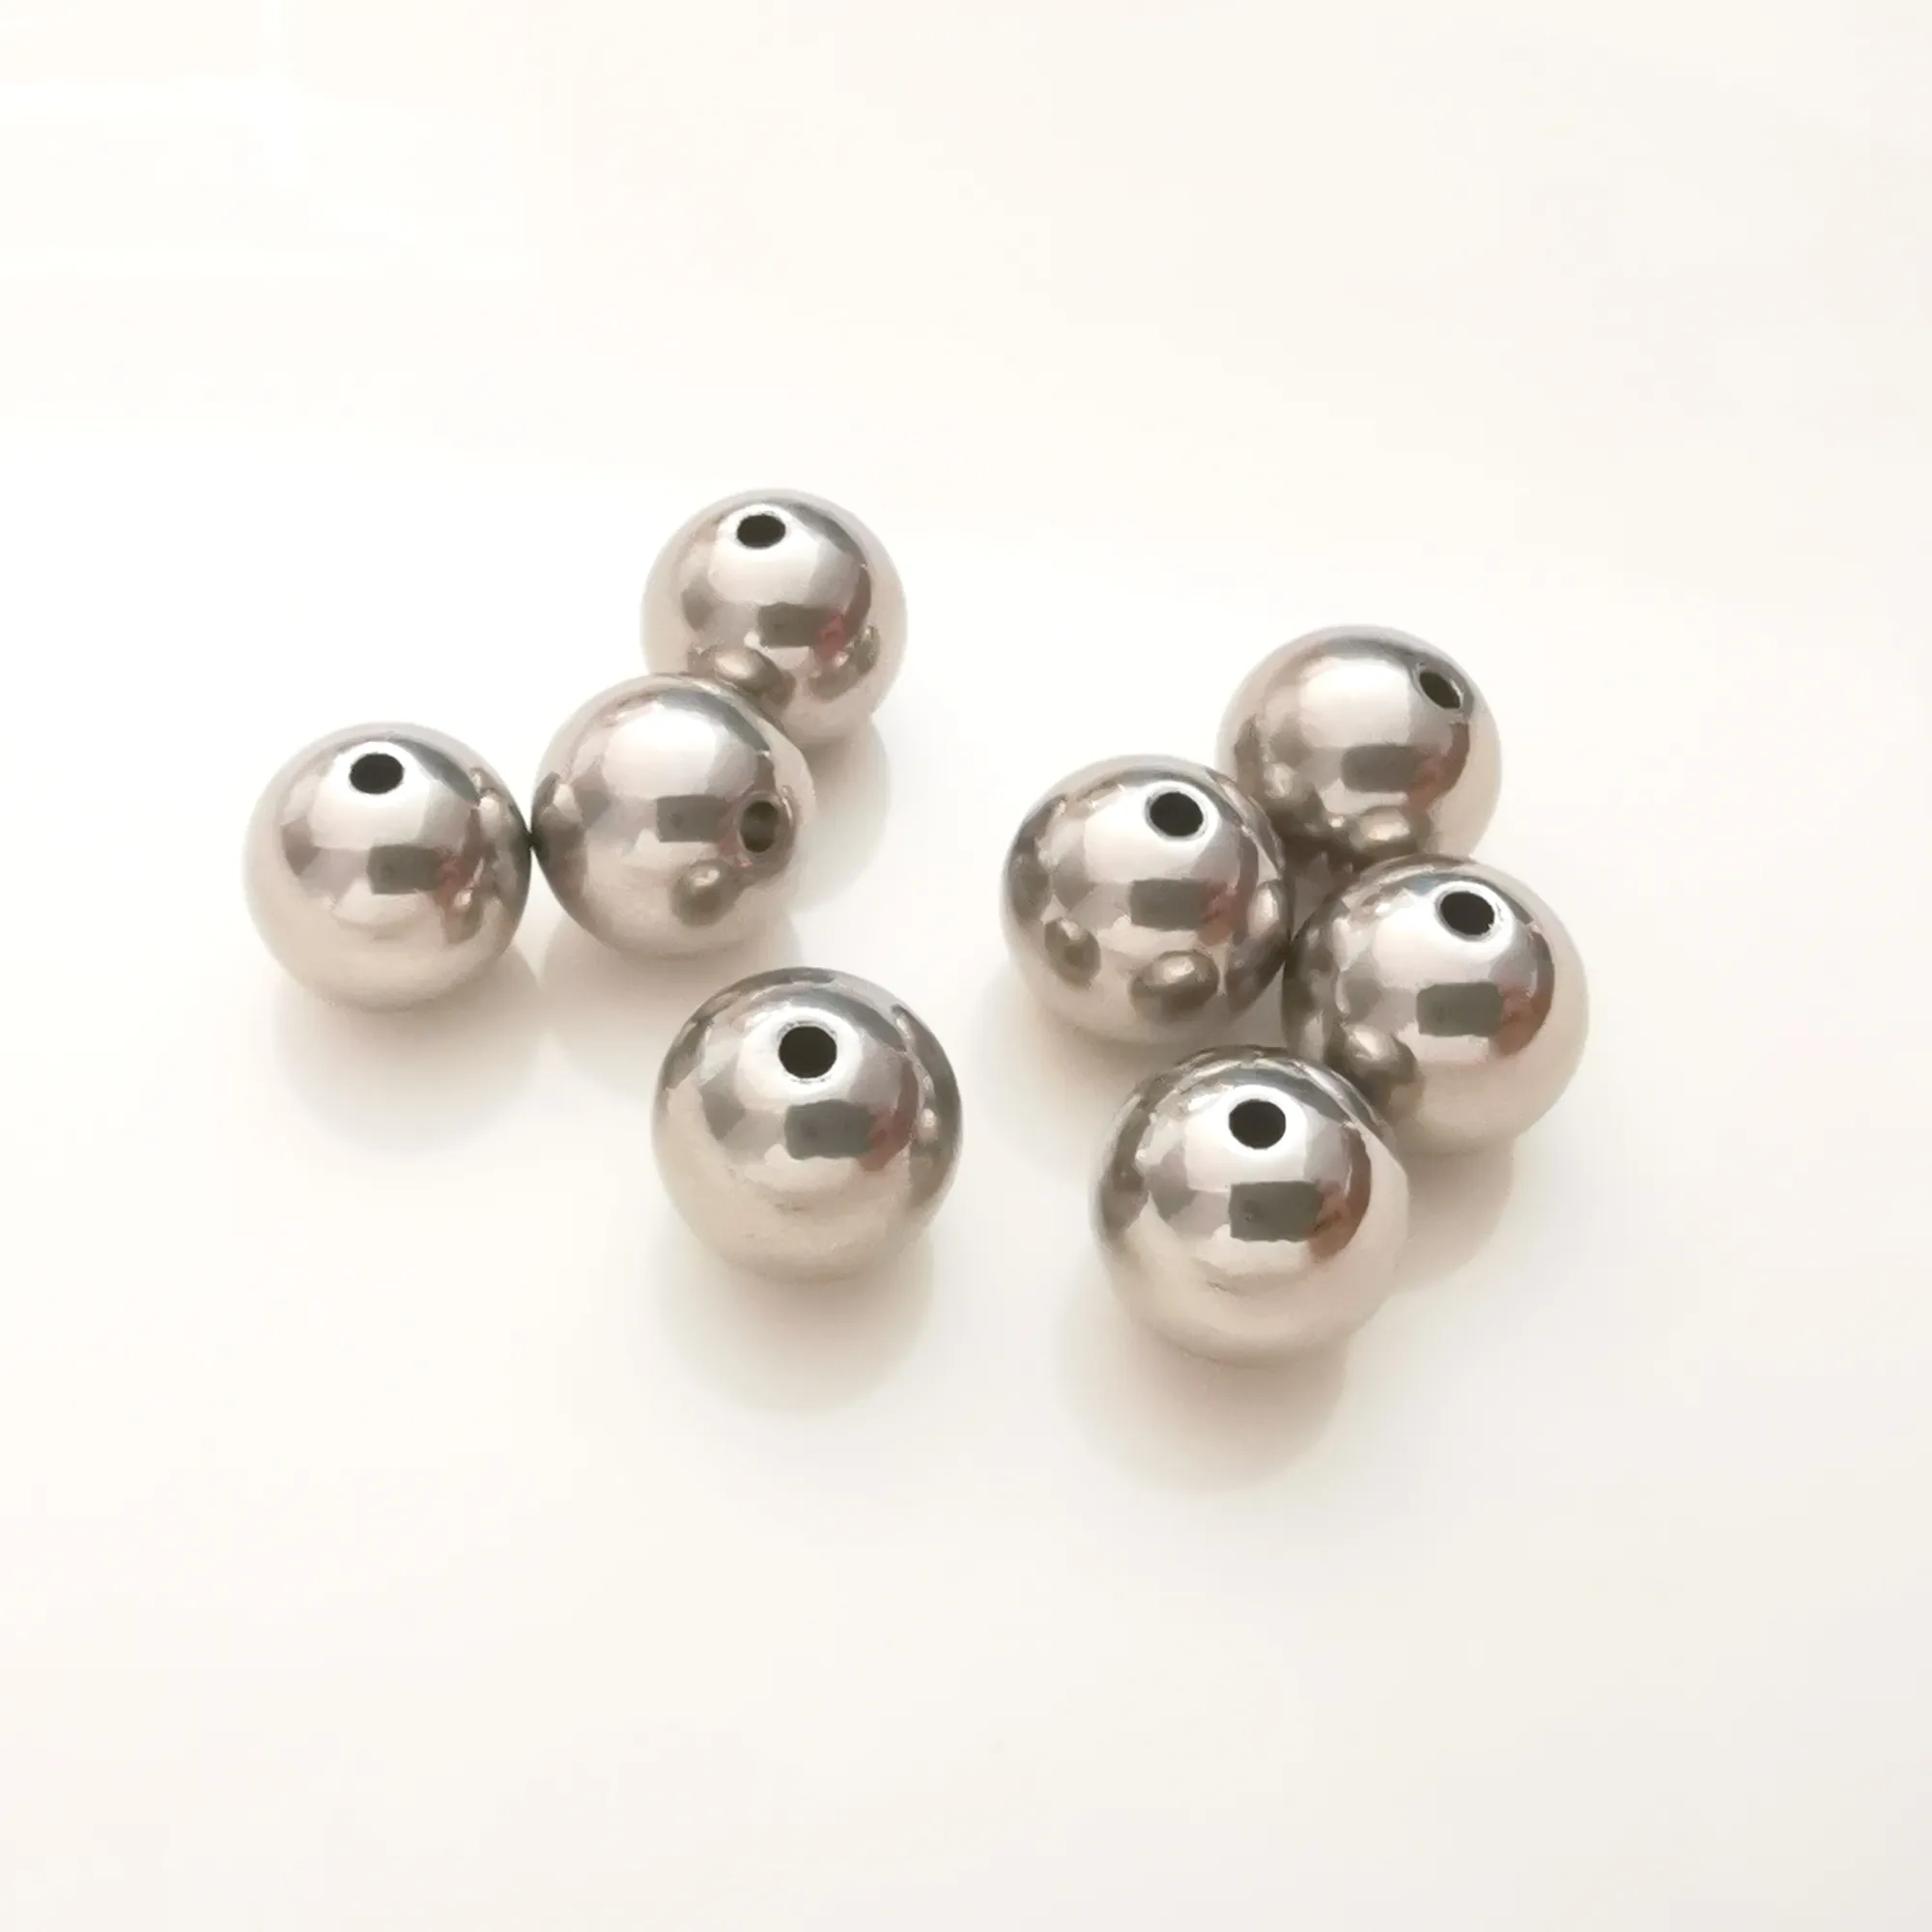 Stainless Steel Round Spacers Ball Spacer Stainless Steel Beads